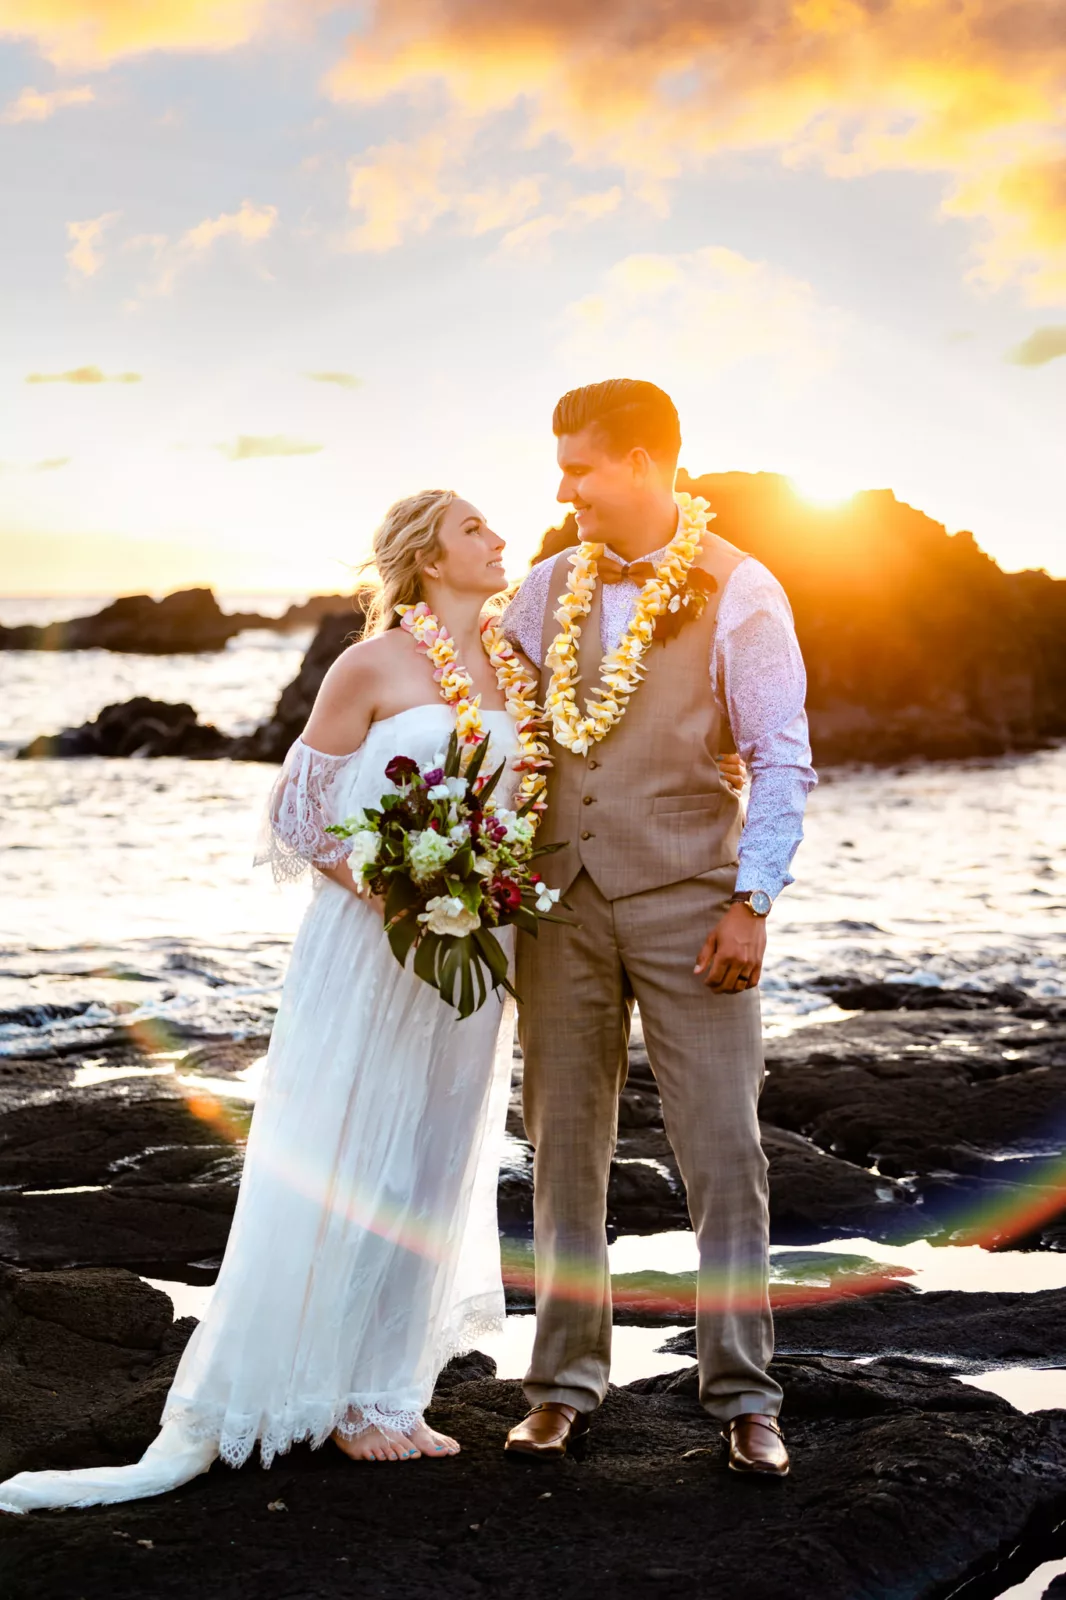 Happily ever after for our couple after the Pink Pineapple Big Island elopement